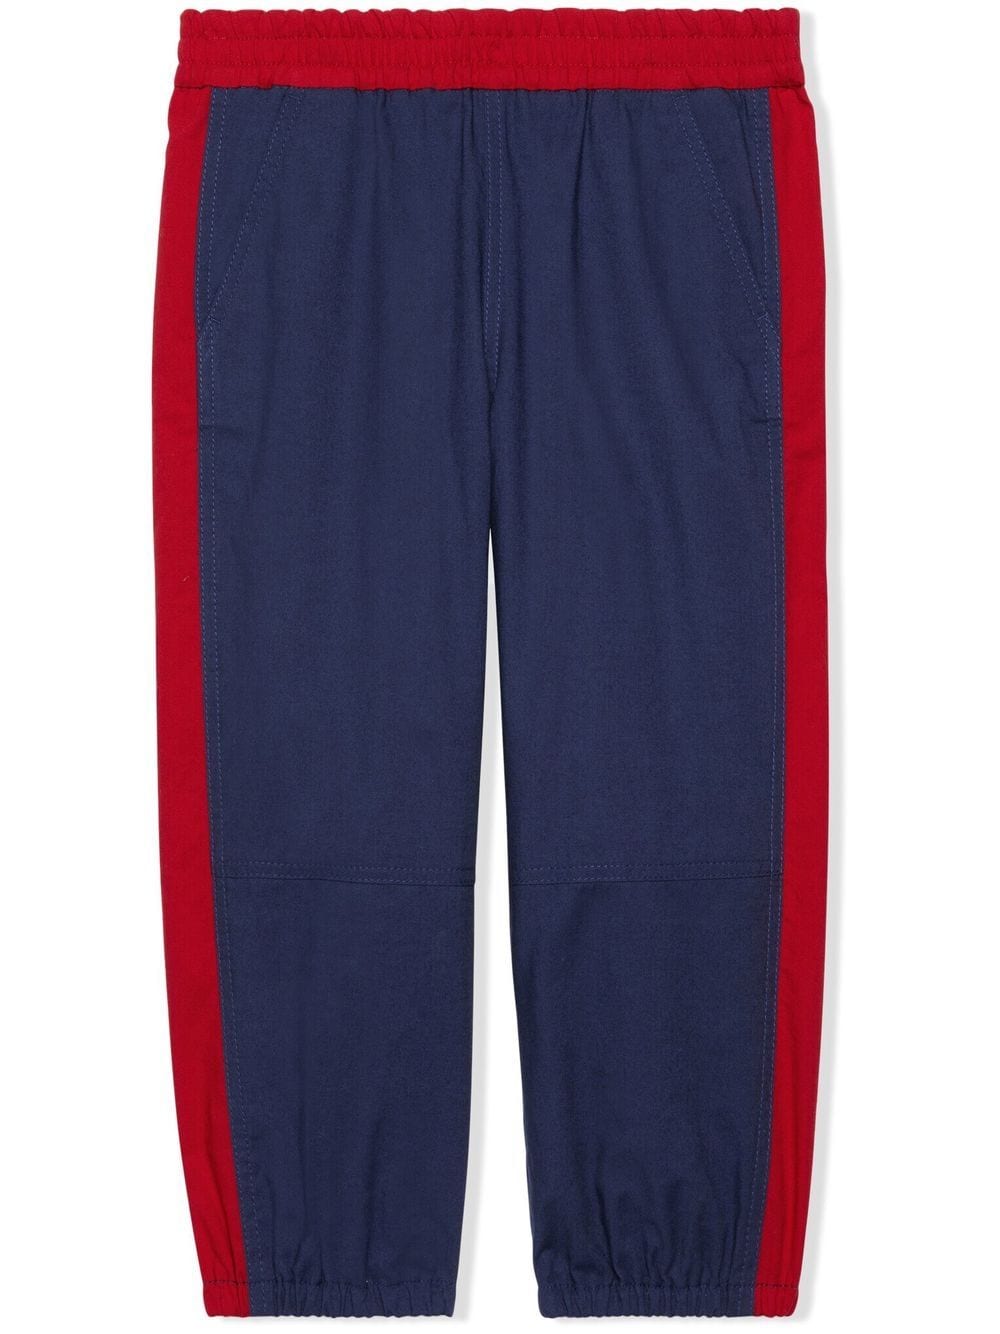 Blue trousers for children